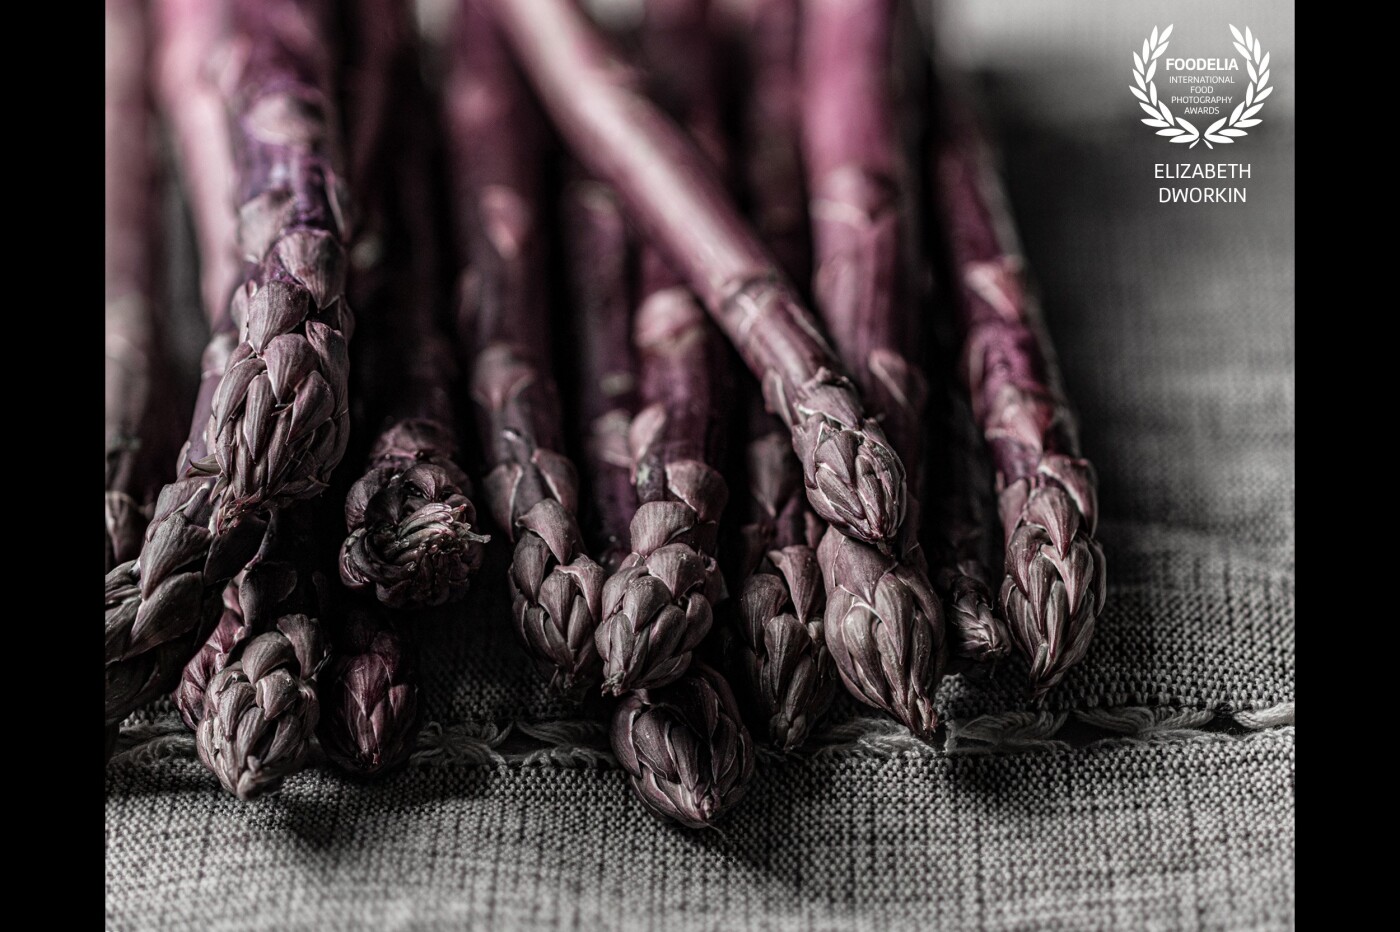 This was my first time ever tasting purple asparagus (after I photographed them, of course). They were so super delicious. I could not believe how different they taste from the green!